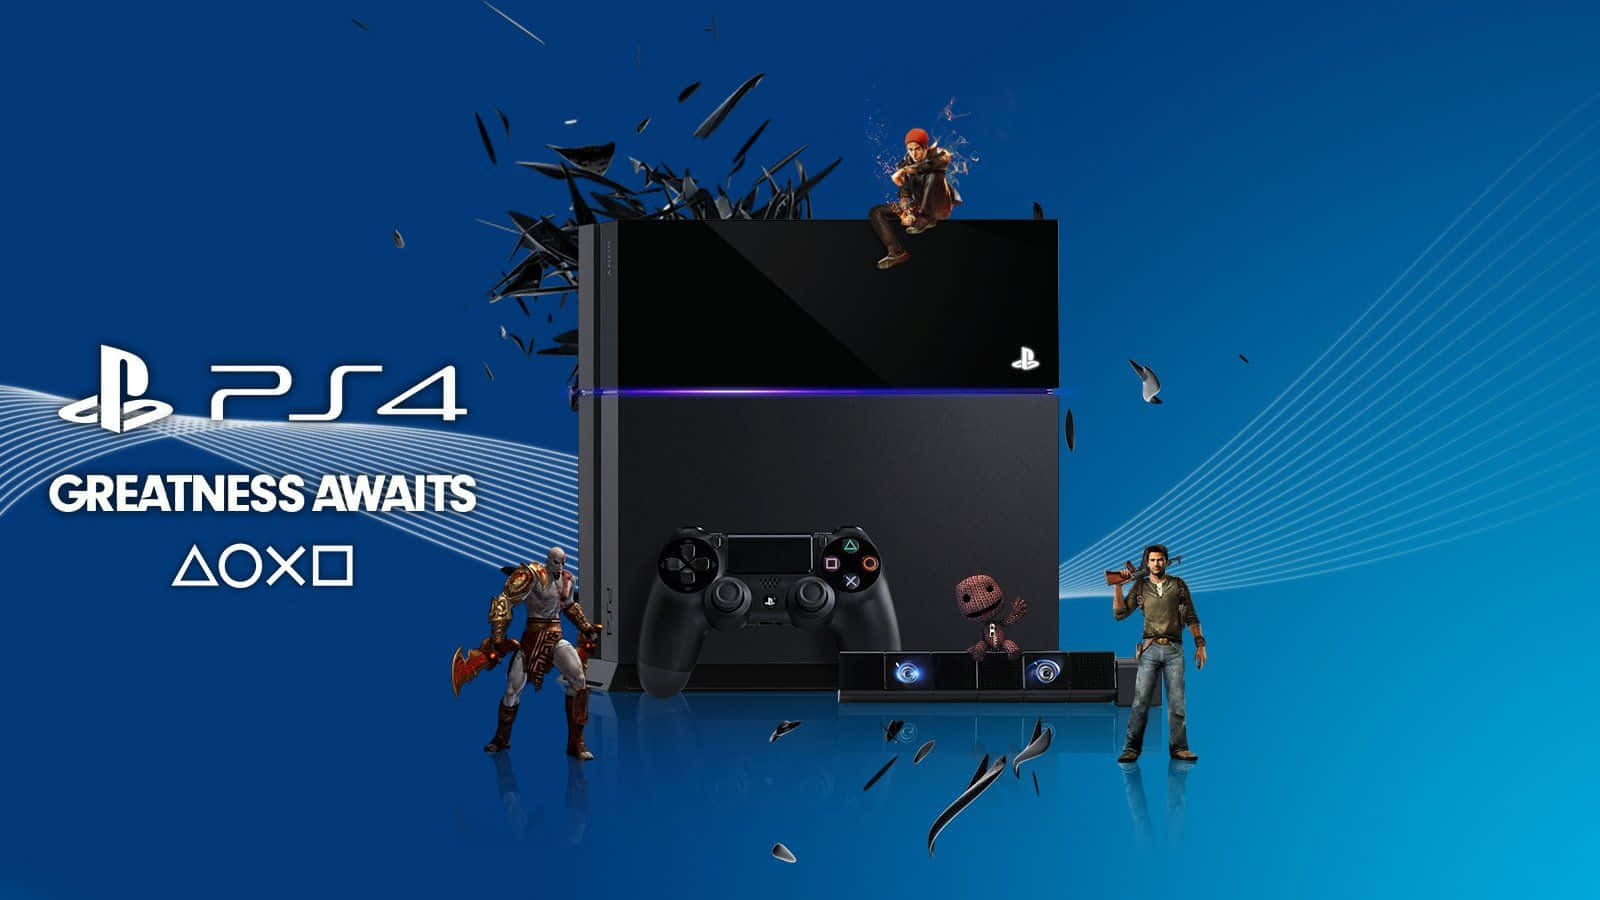 Cool Ps4 Game Characters Surrounding Console With Quotes